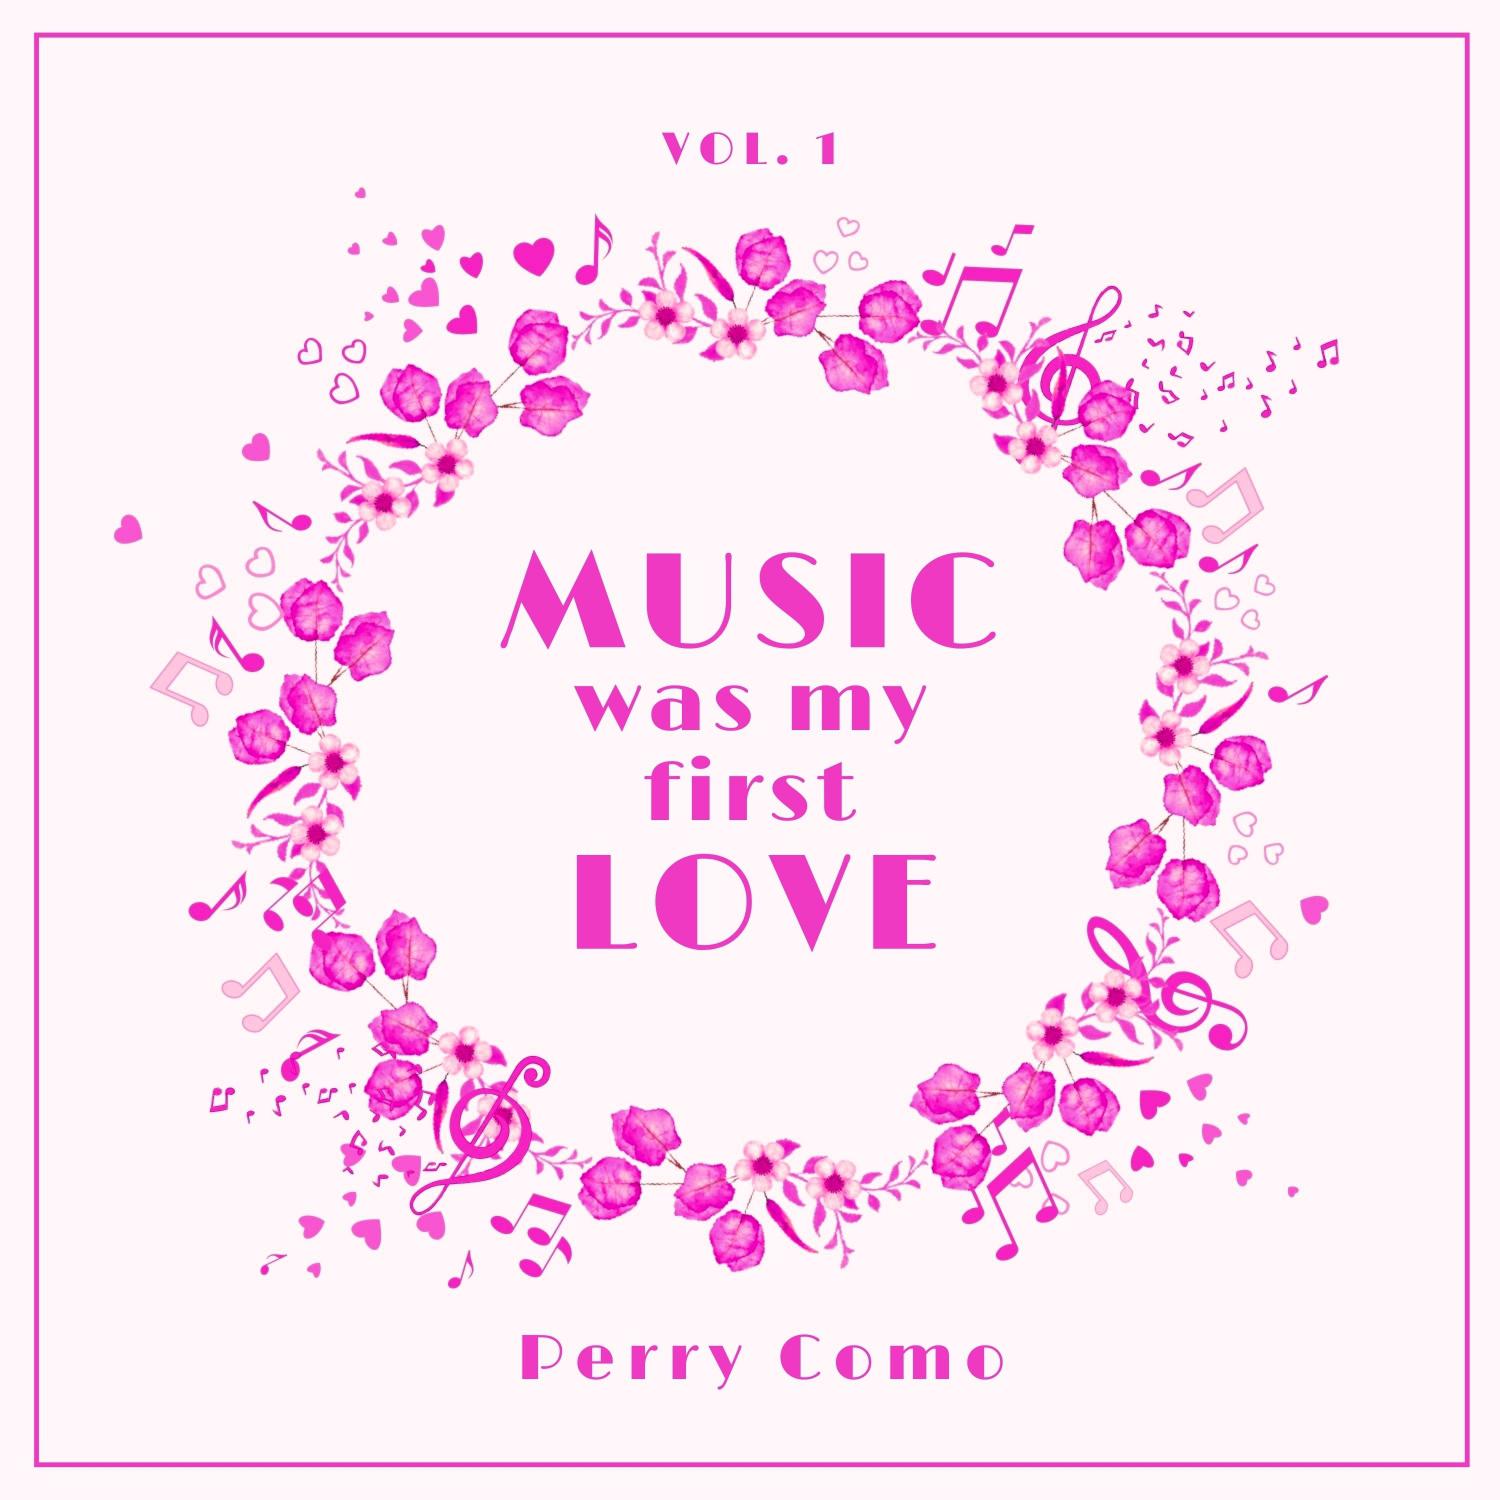 Perry Como - Dear Hearts and Gentle People (Original Mix)